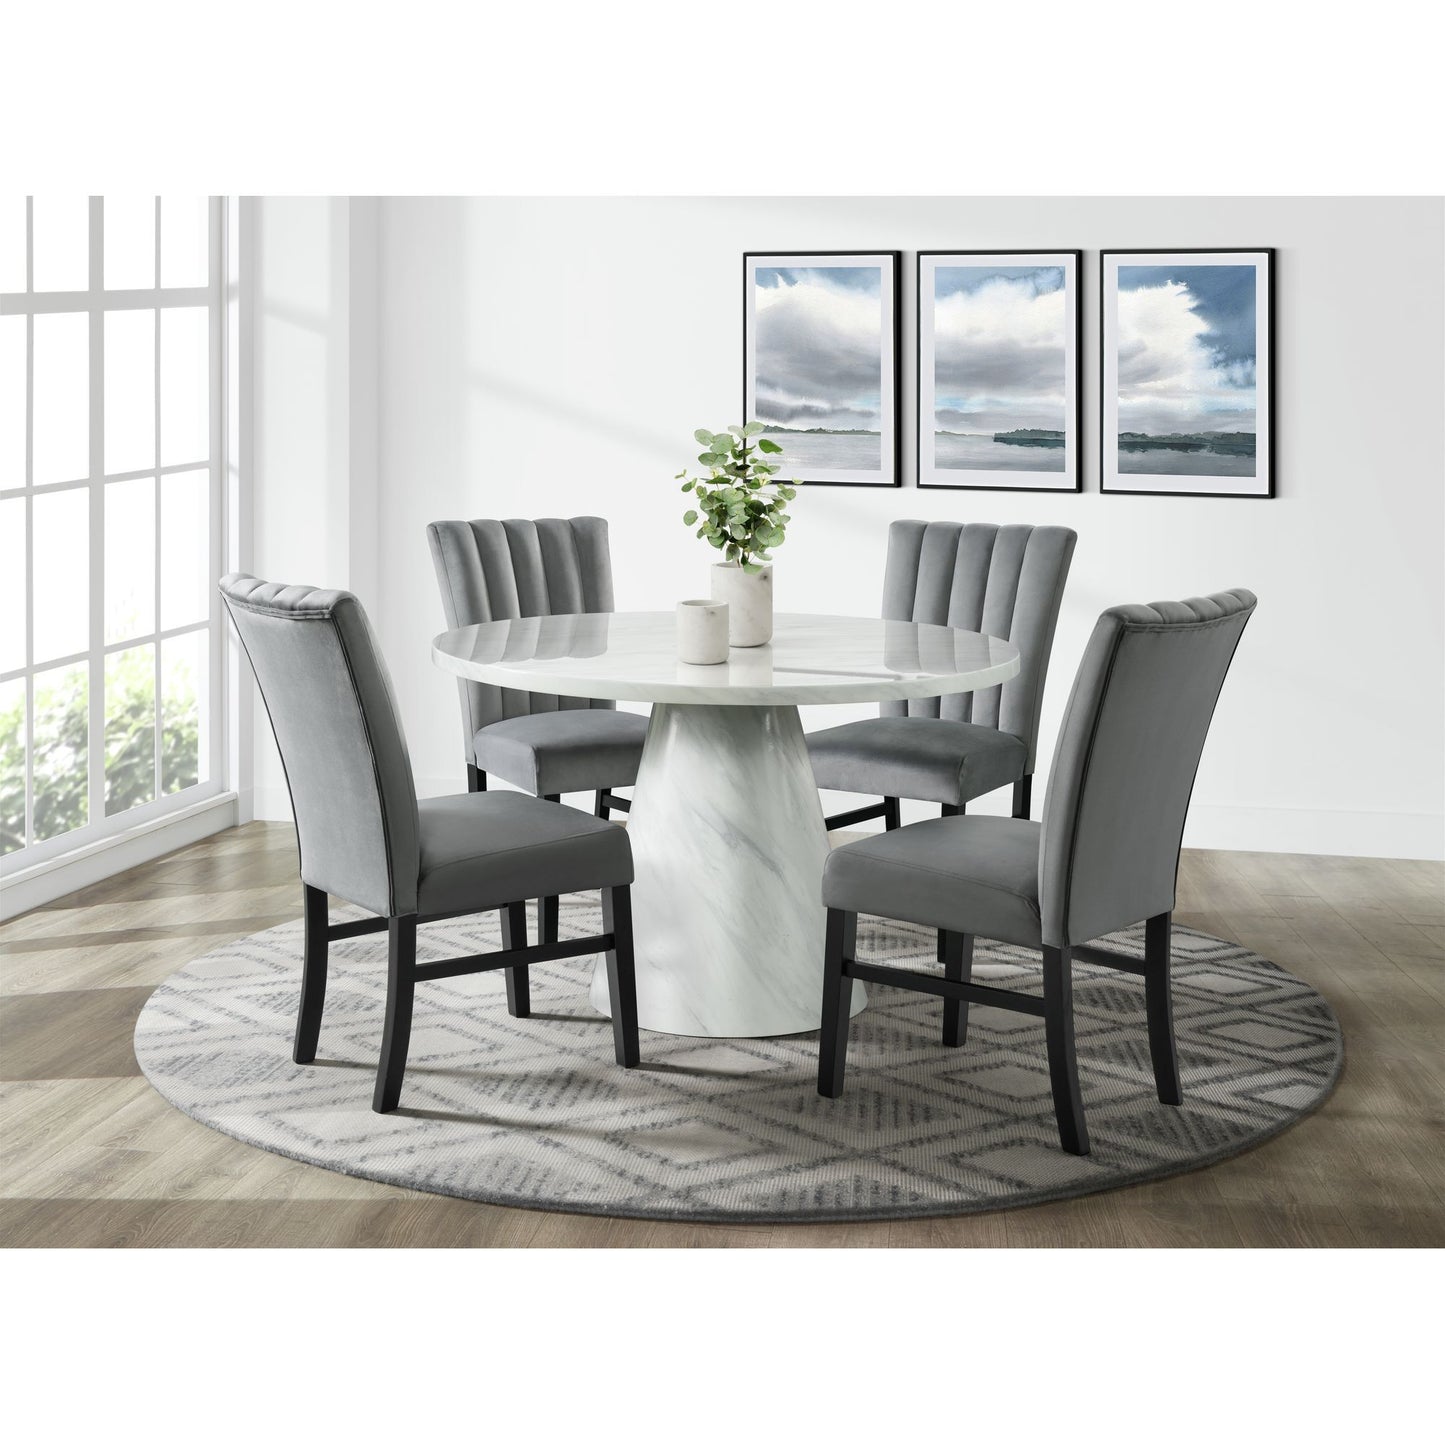 Bellini - Dining Set (Round Table)